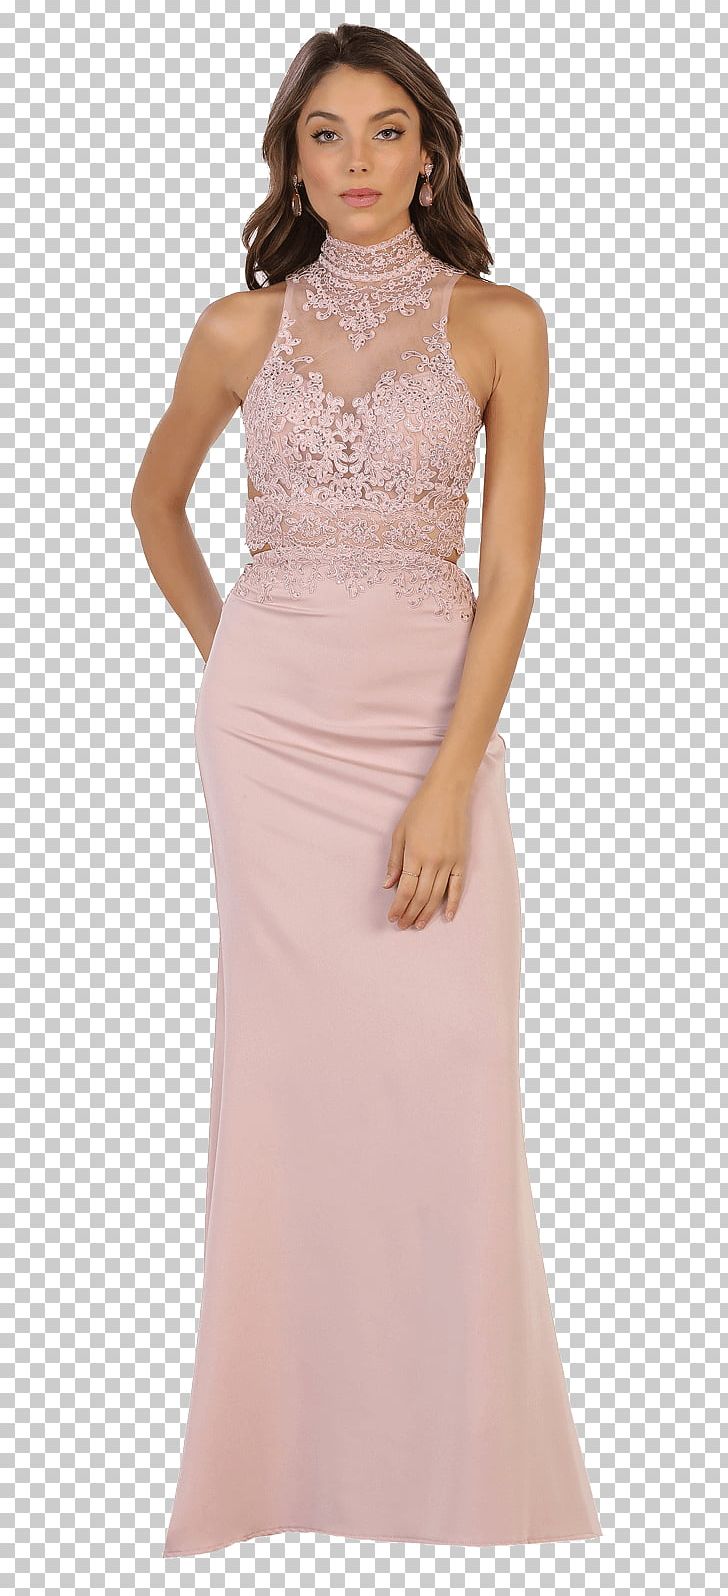 Wedding Dress Prom Gown Cocktail Dress PNG, Clipart, Aline, Bridal ...